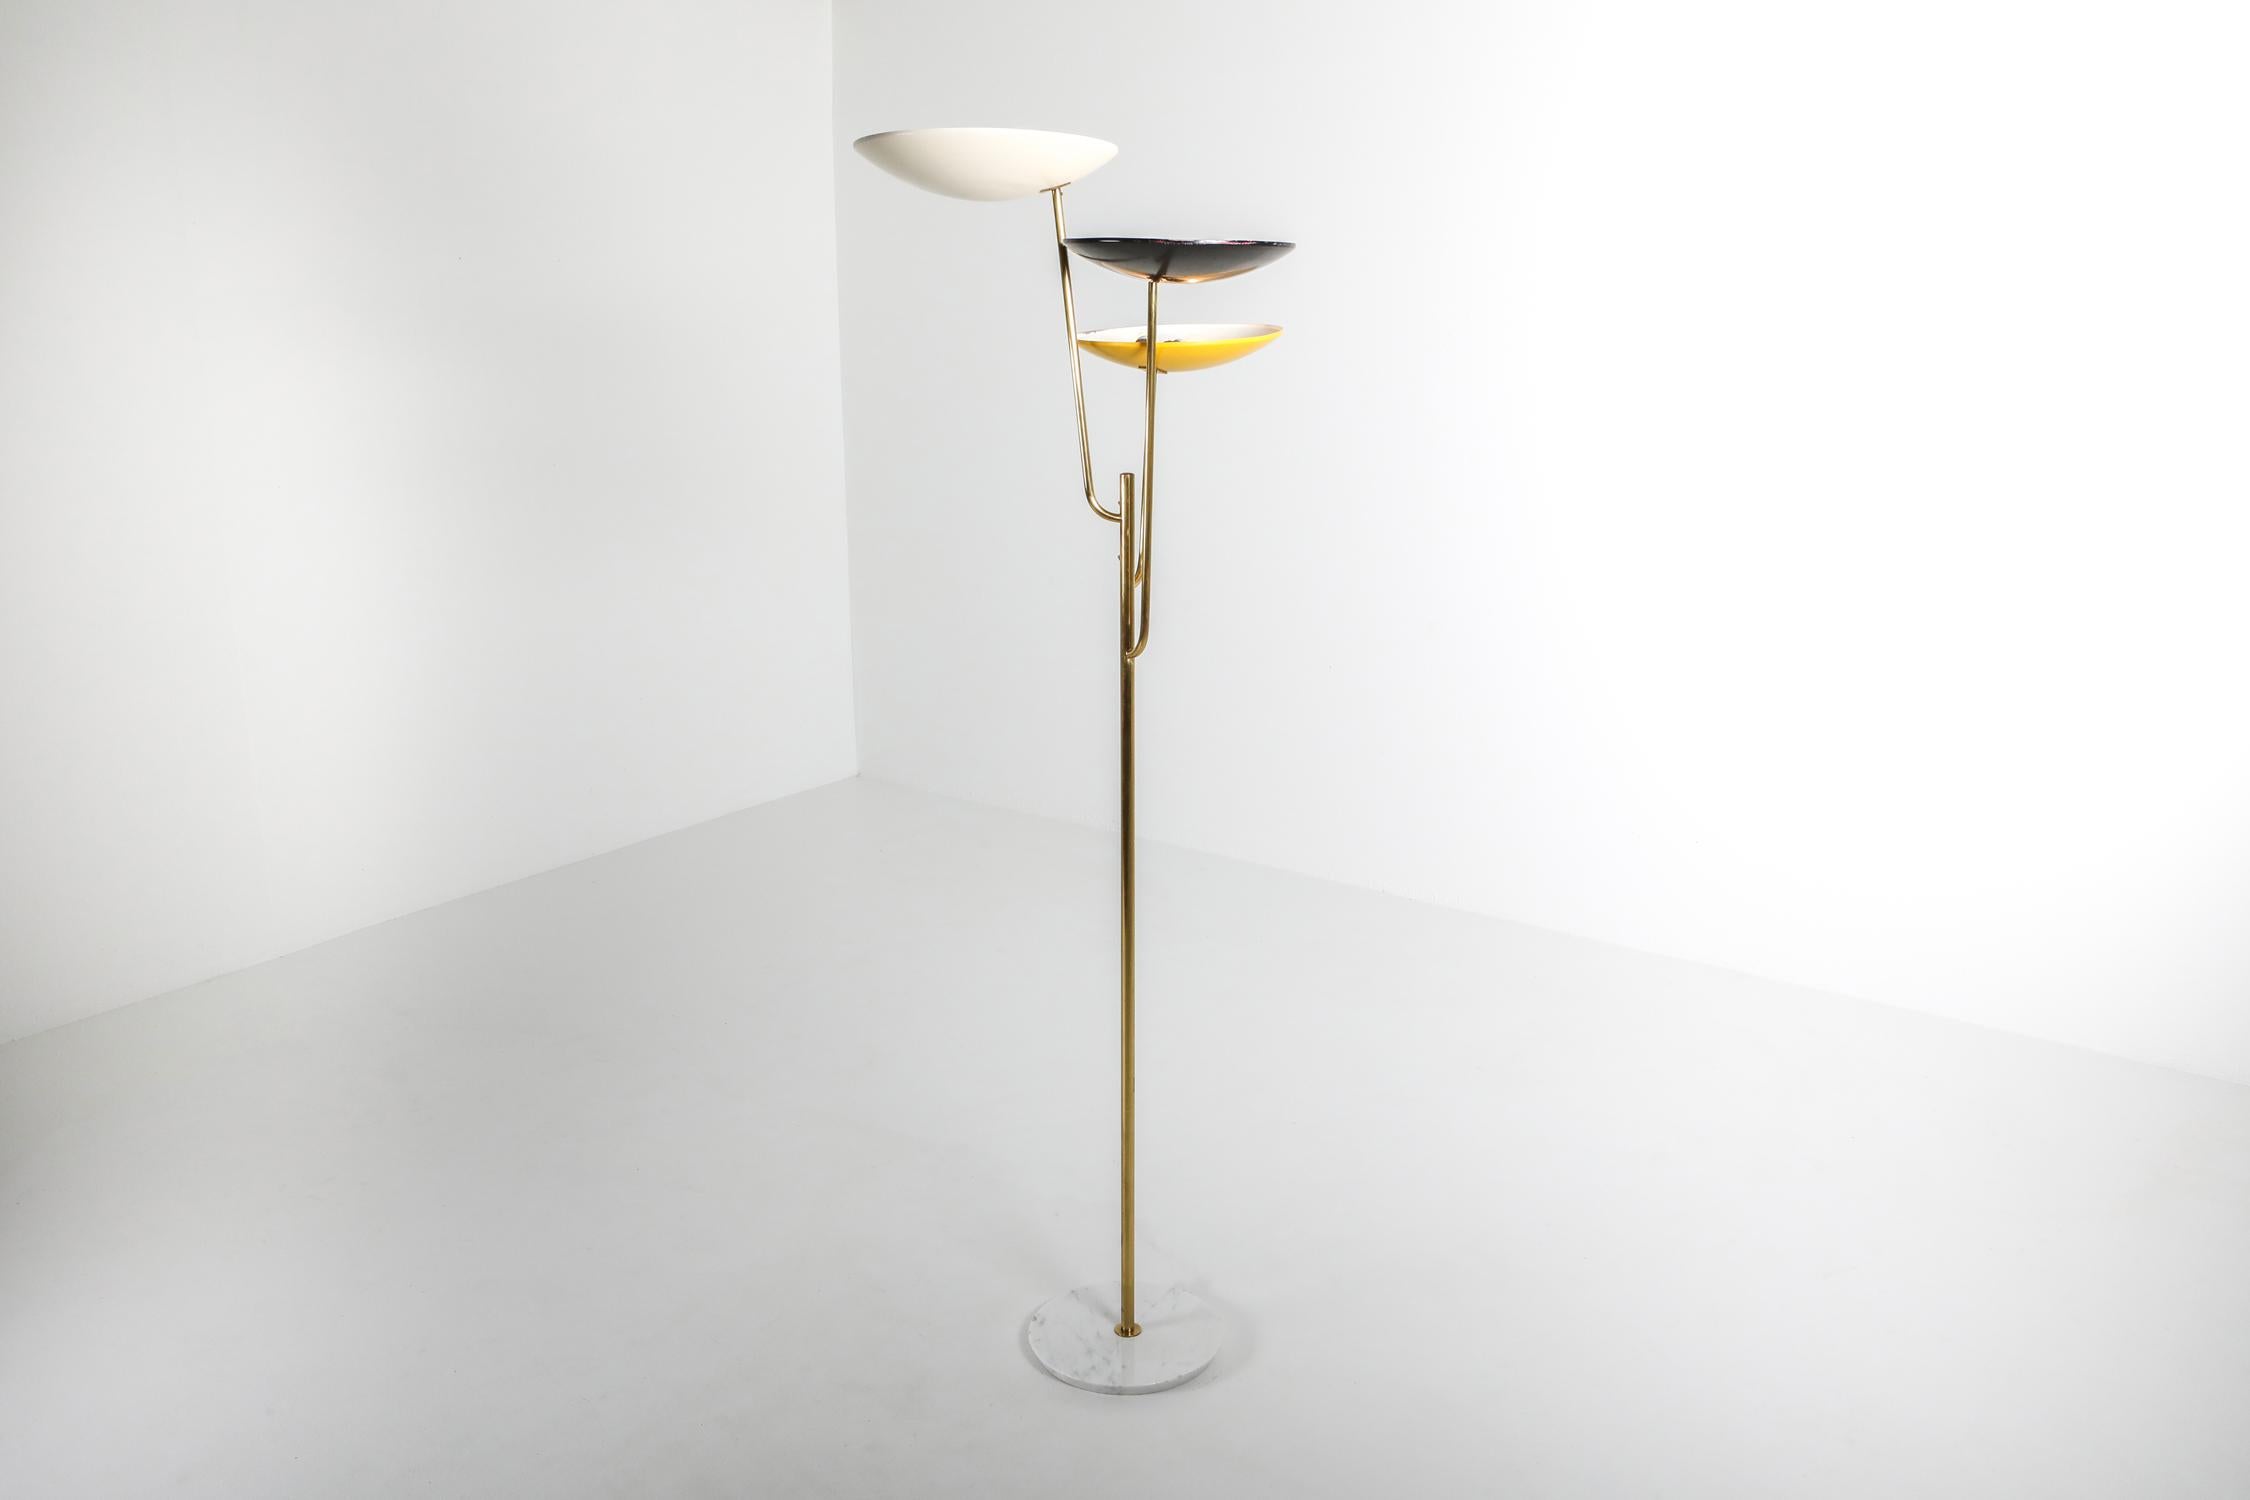 Arredoluce style uplighting floor lamp, Italy 1950s

Tricolor floor lamp, brass stem and white, yellow and black lacquered metal shade.
 